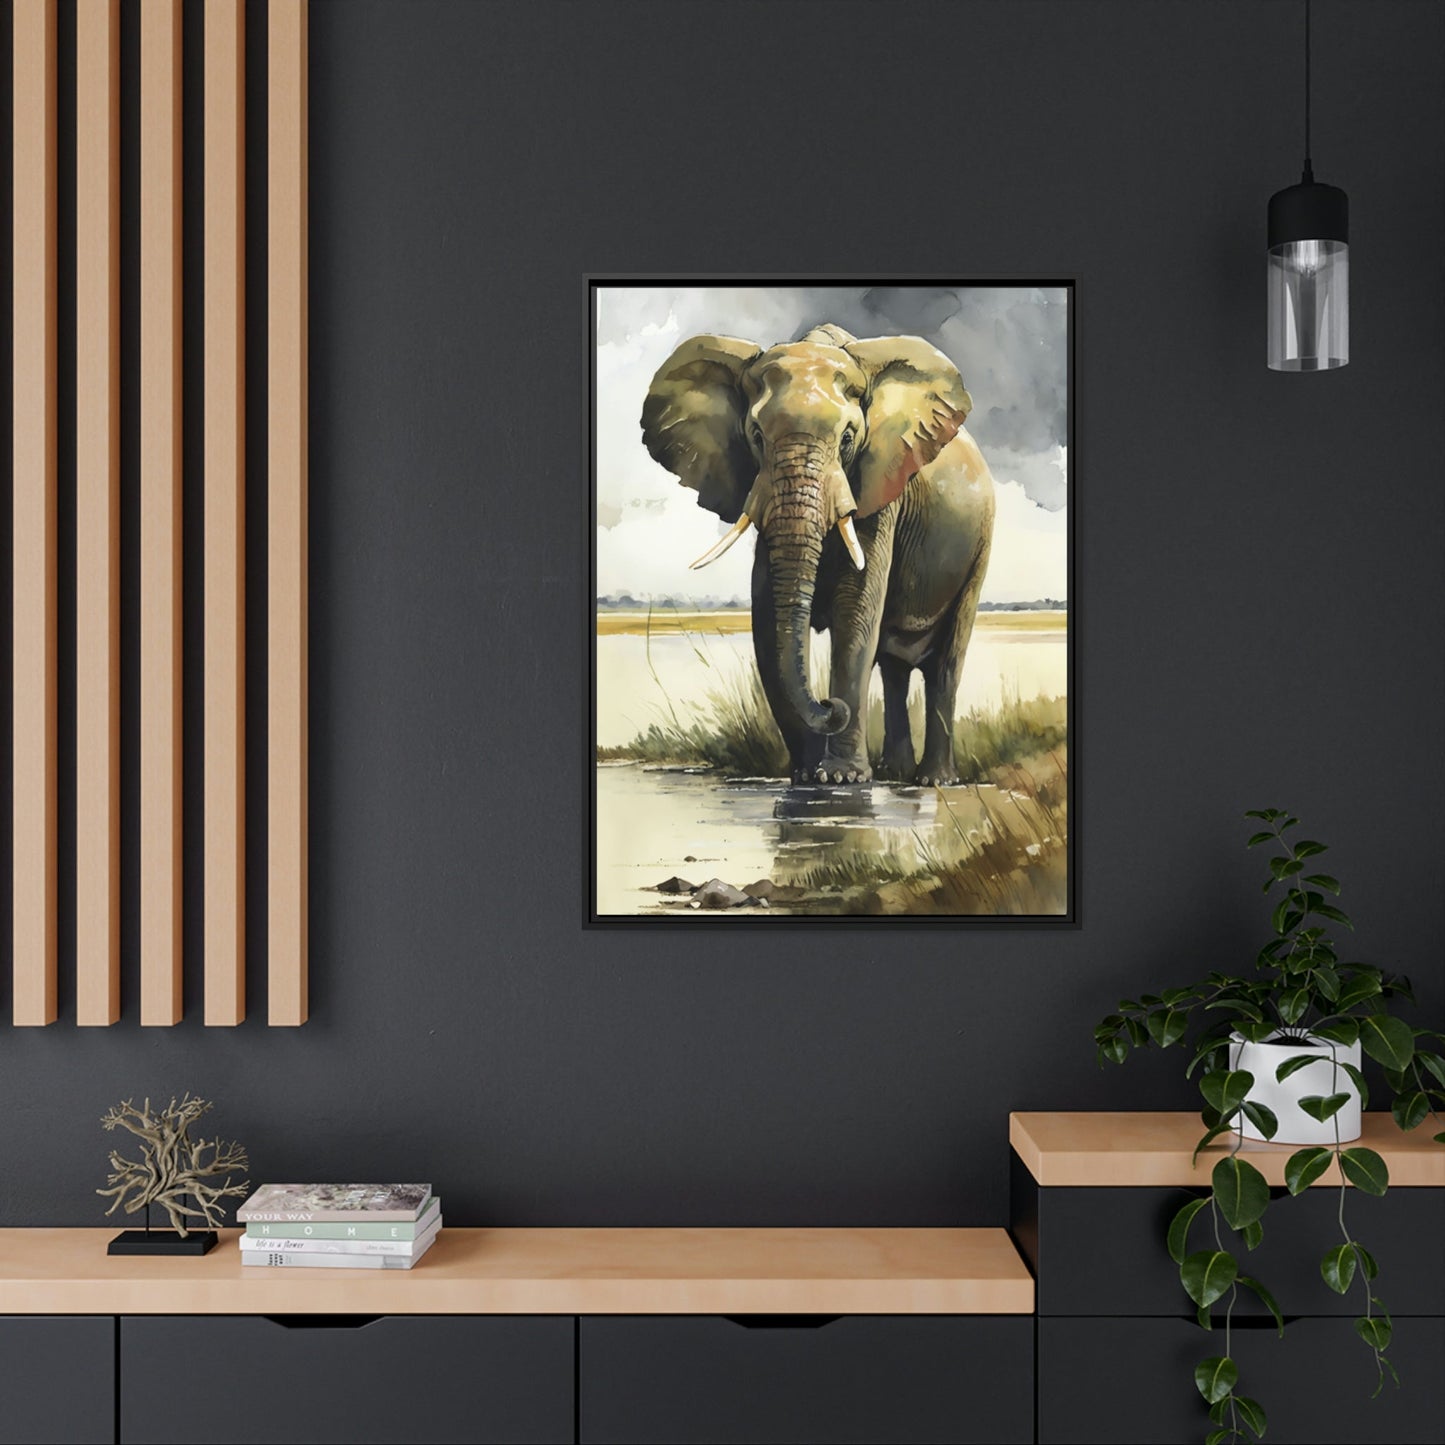 Serene Giants: Beautiful Art of Elephant in Calming Natural Landscapes